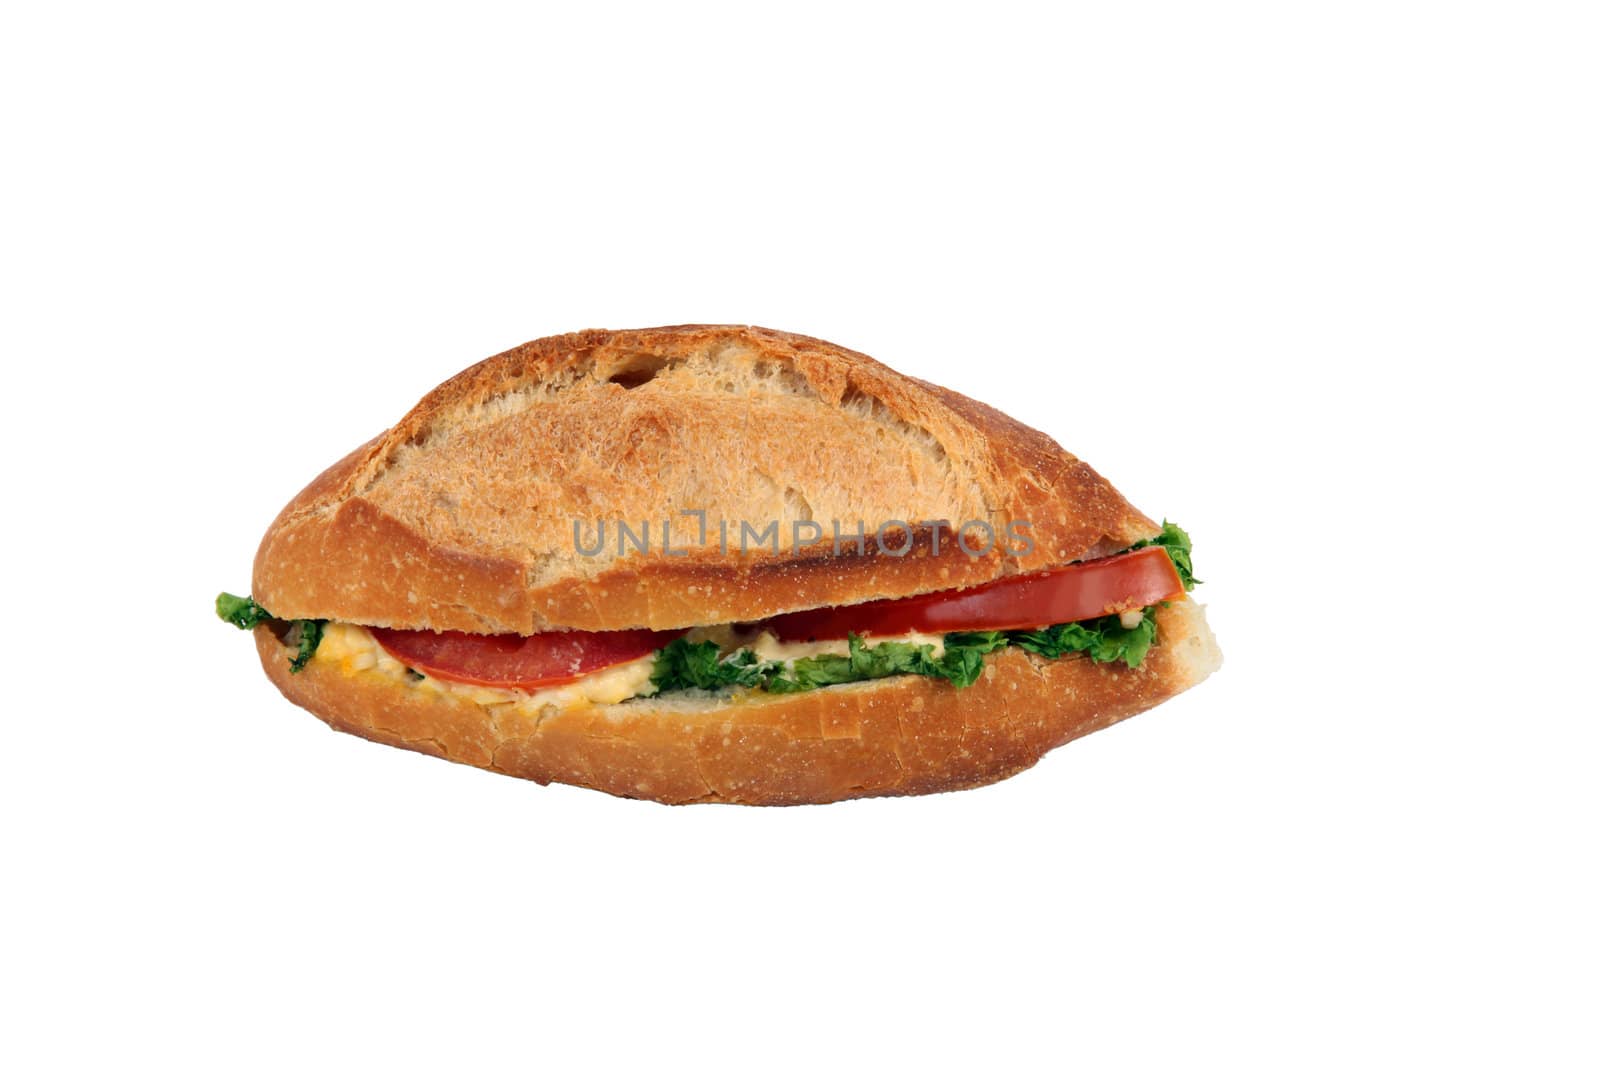 Sandwich on white background by phovoir